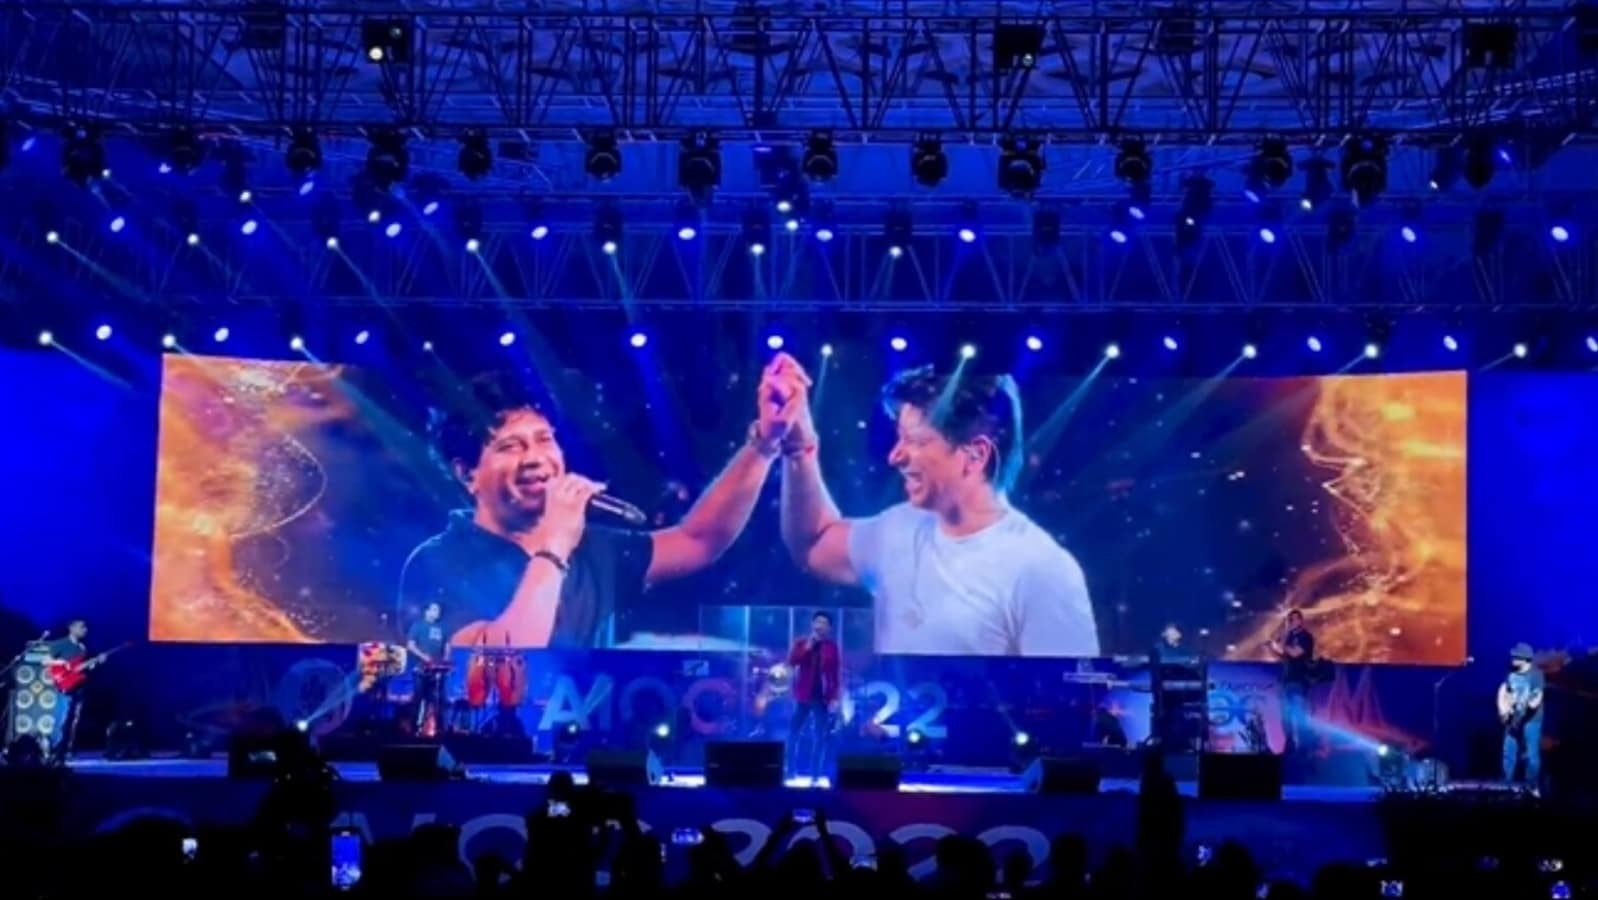 Shaan pays moving tribute to KK with his song Pal at event, emotional fans call it ‘true friendship’. Watch